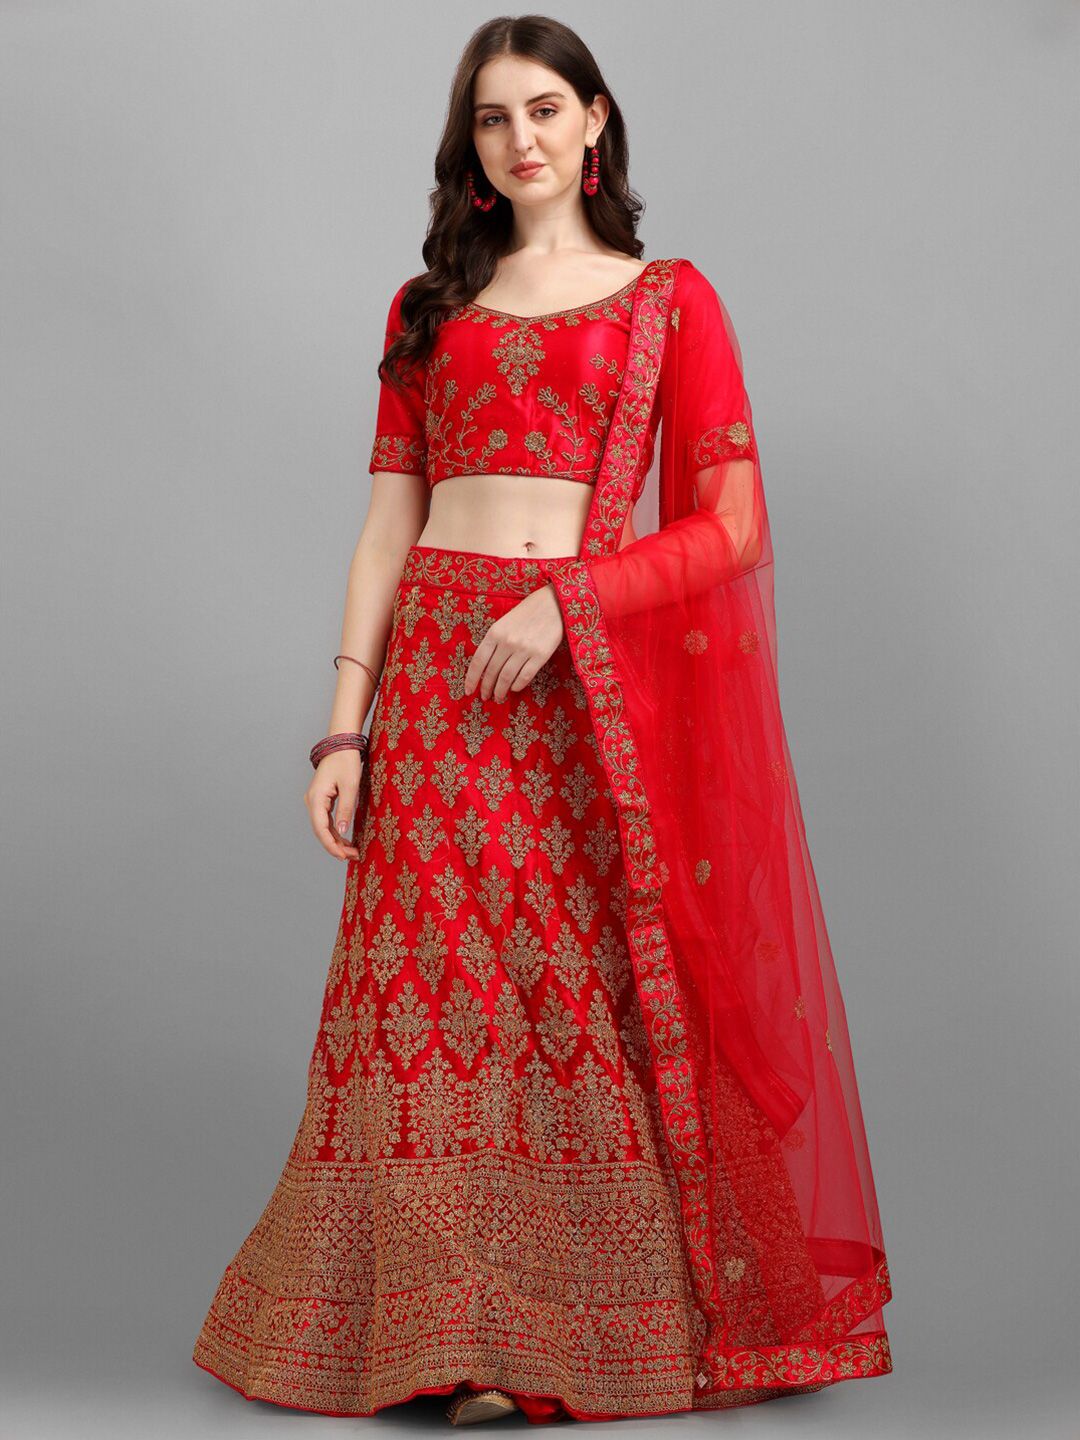 LABEL AARNA Red & Gold-Toned Embroidered Semi-Stitched Lehenga & Unstitched Blouse With Dupatta Price in India